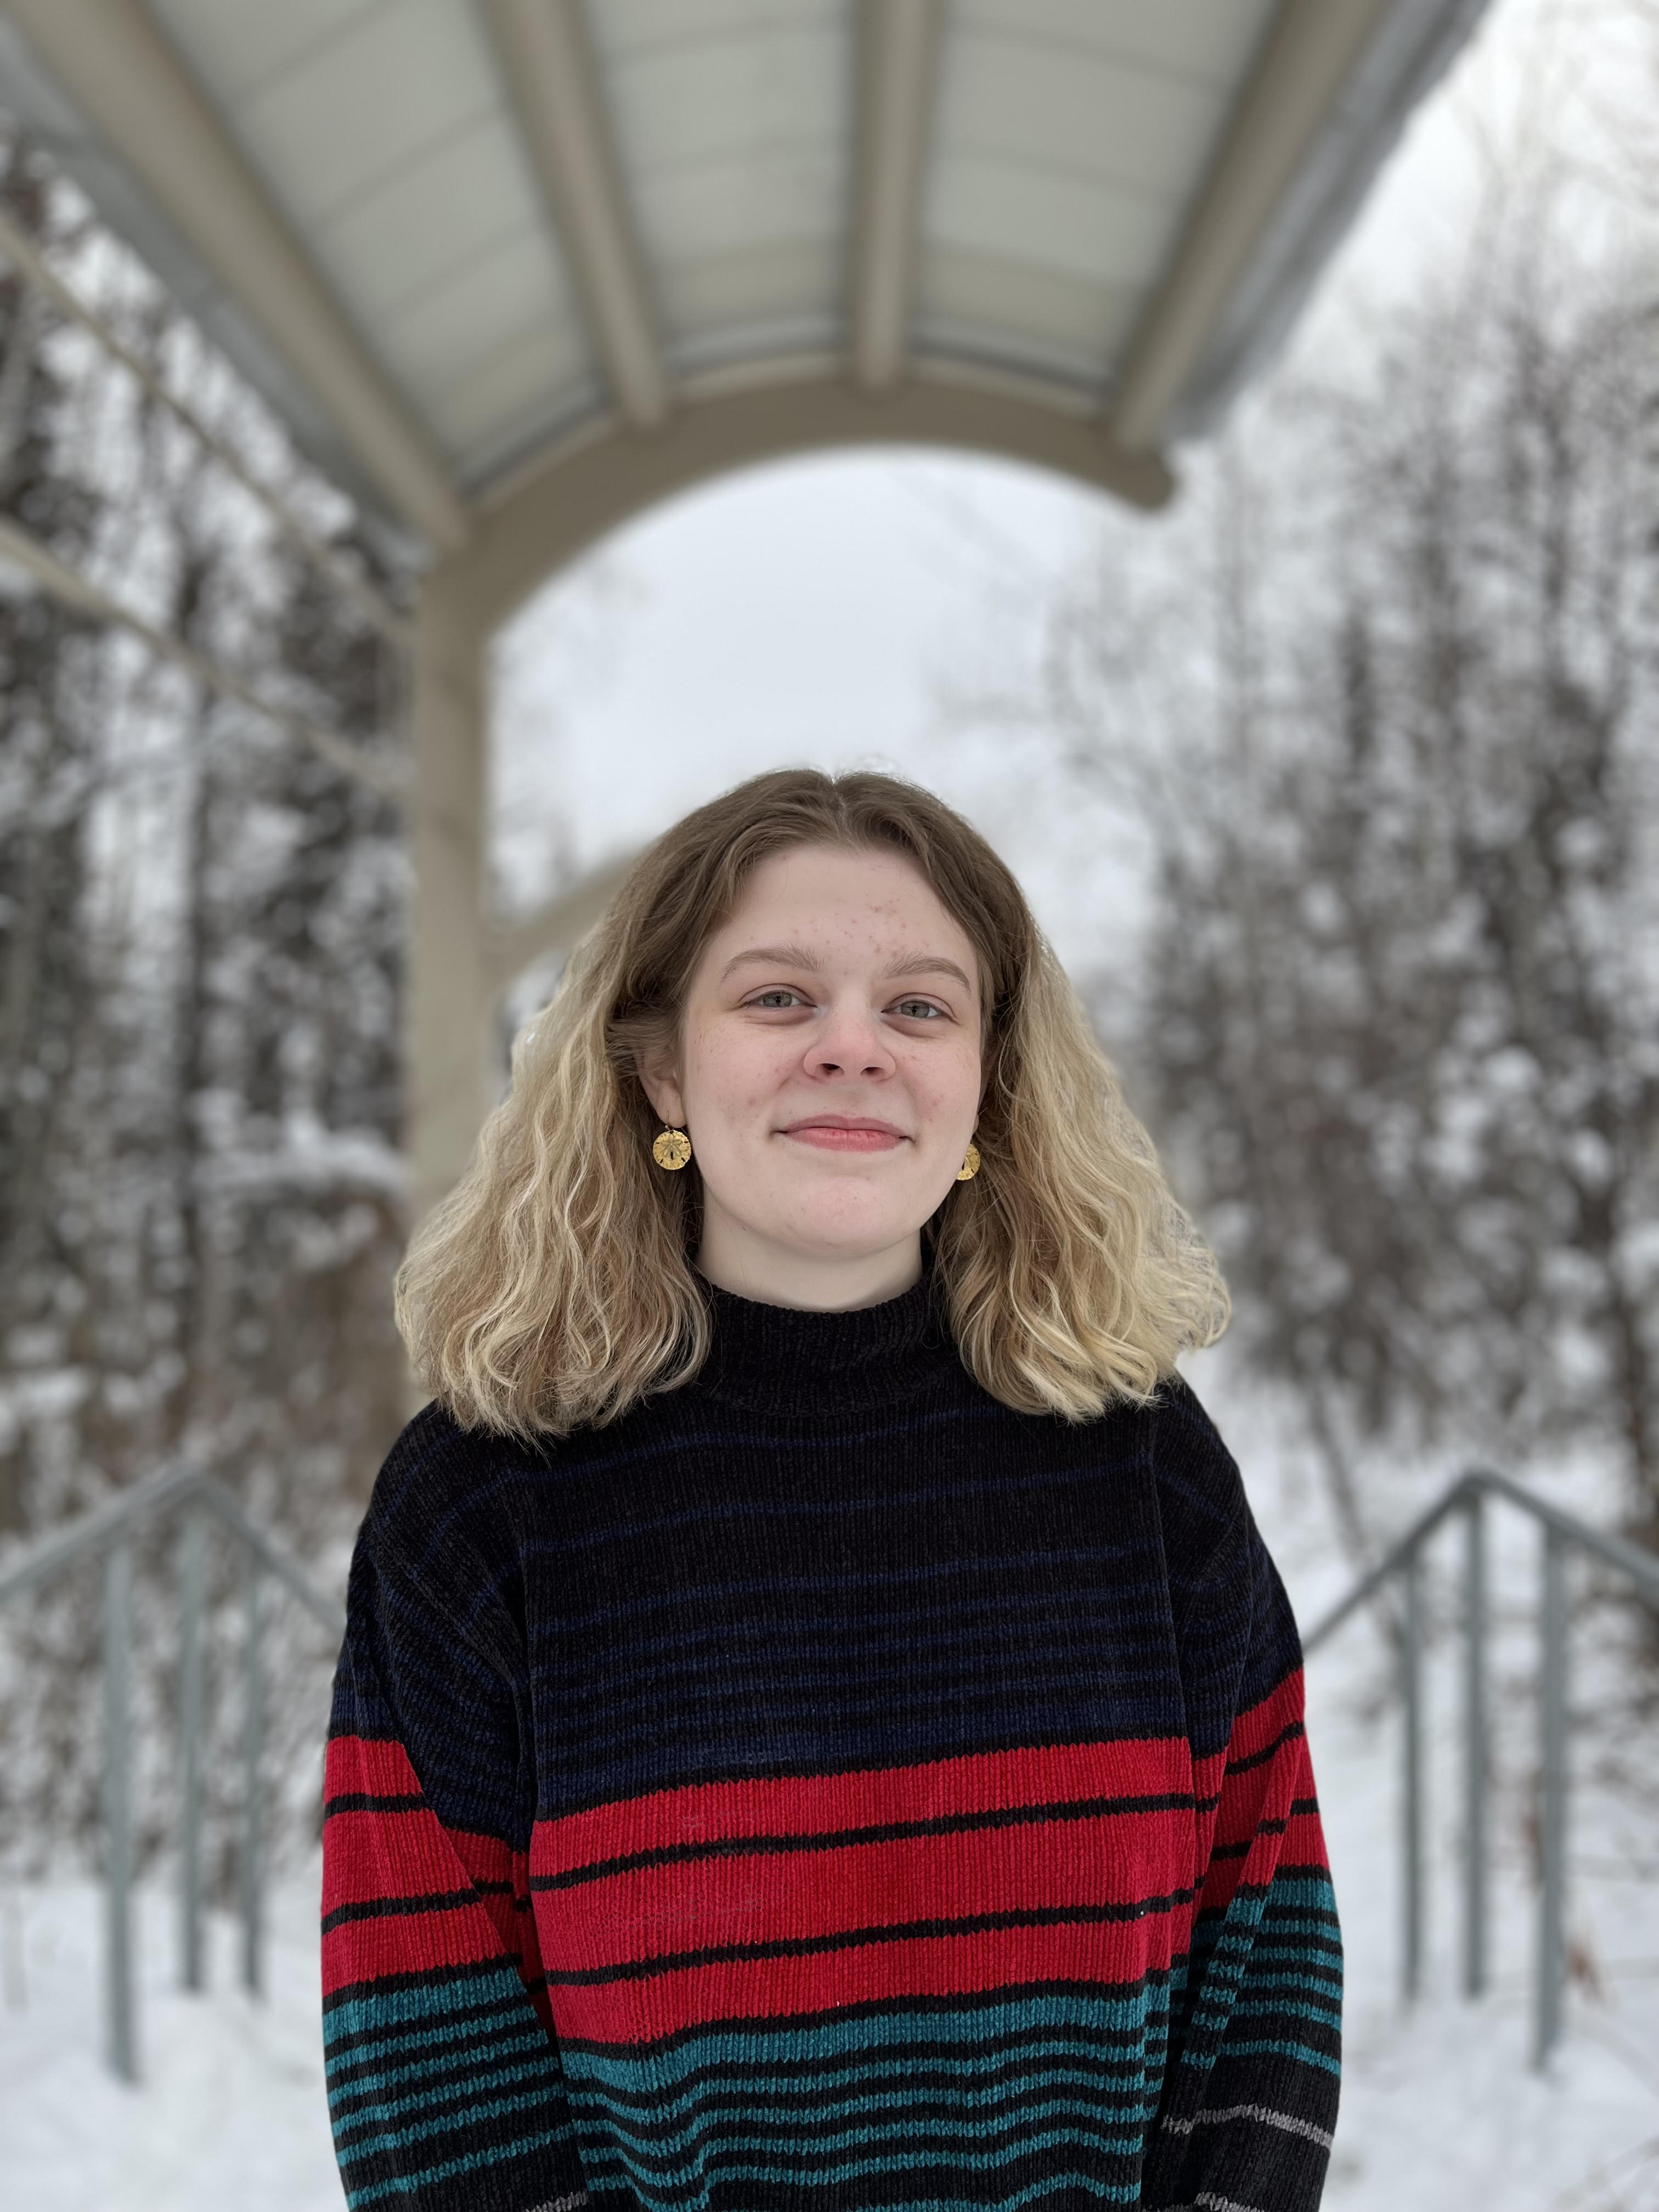 Olivia Ryan in front of winter forest background.